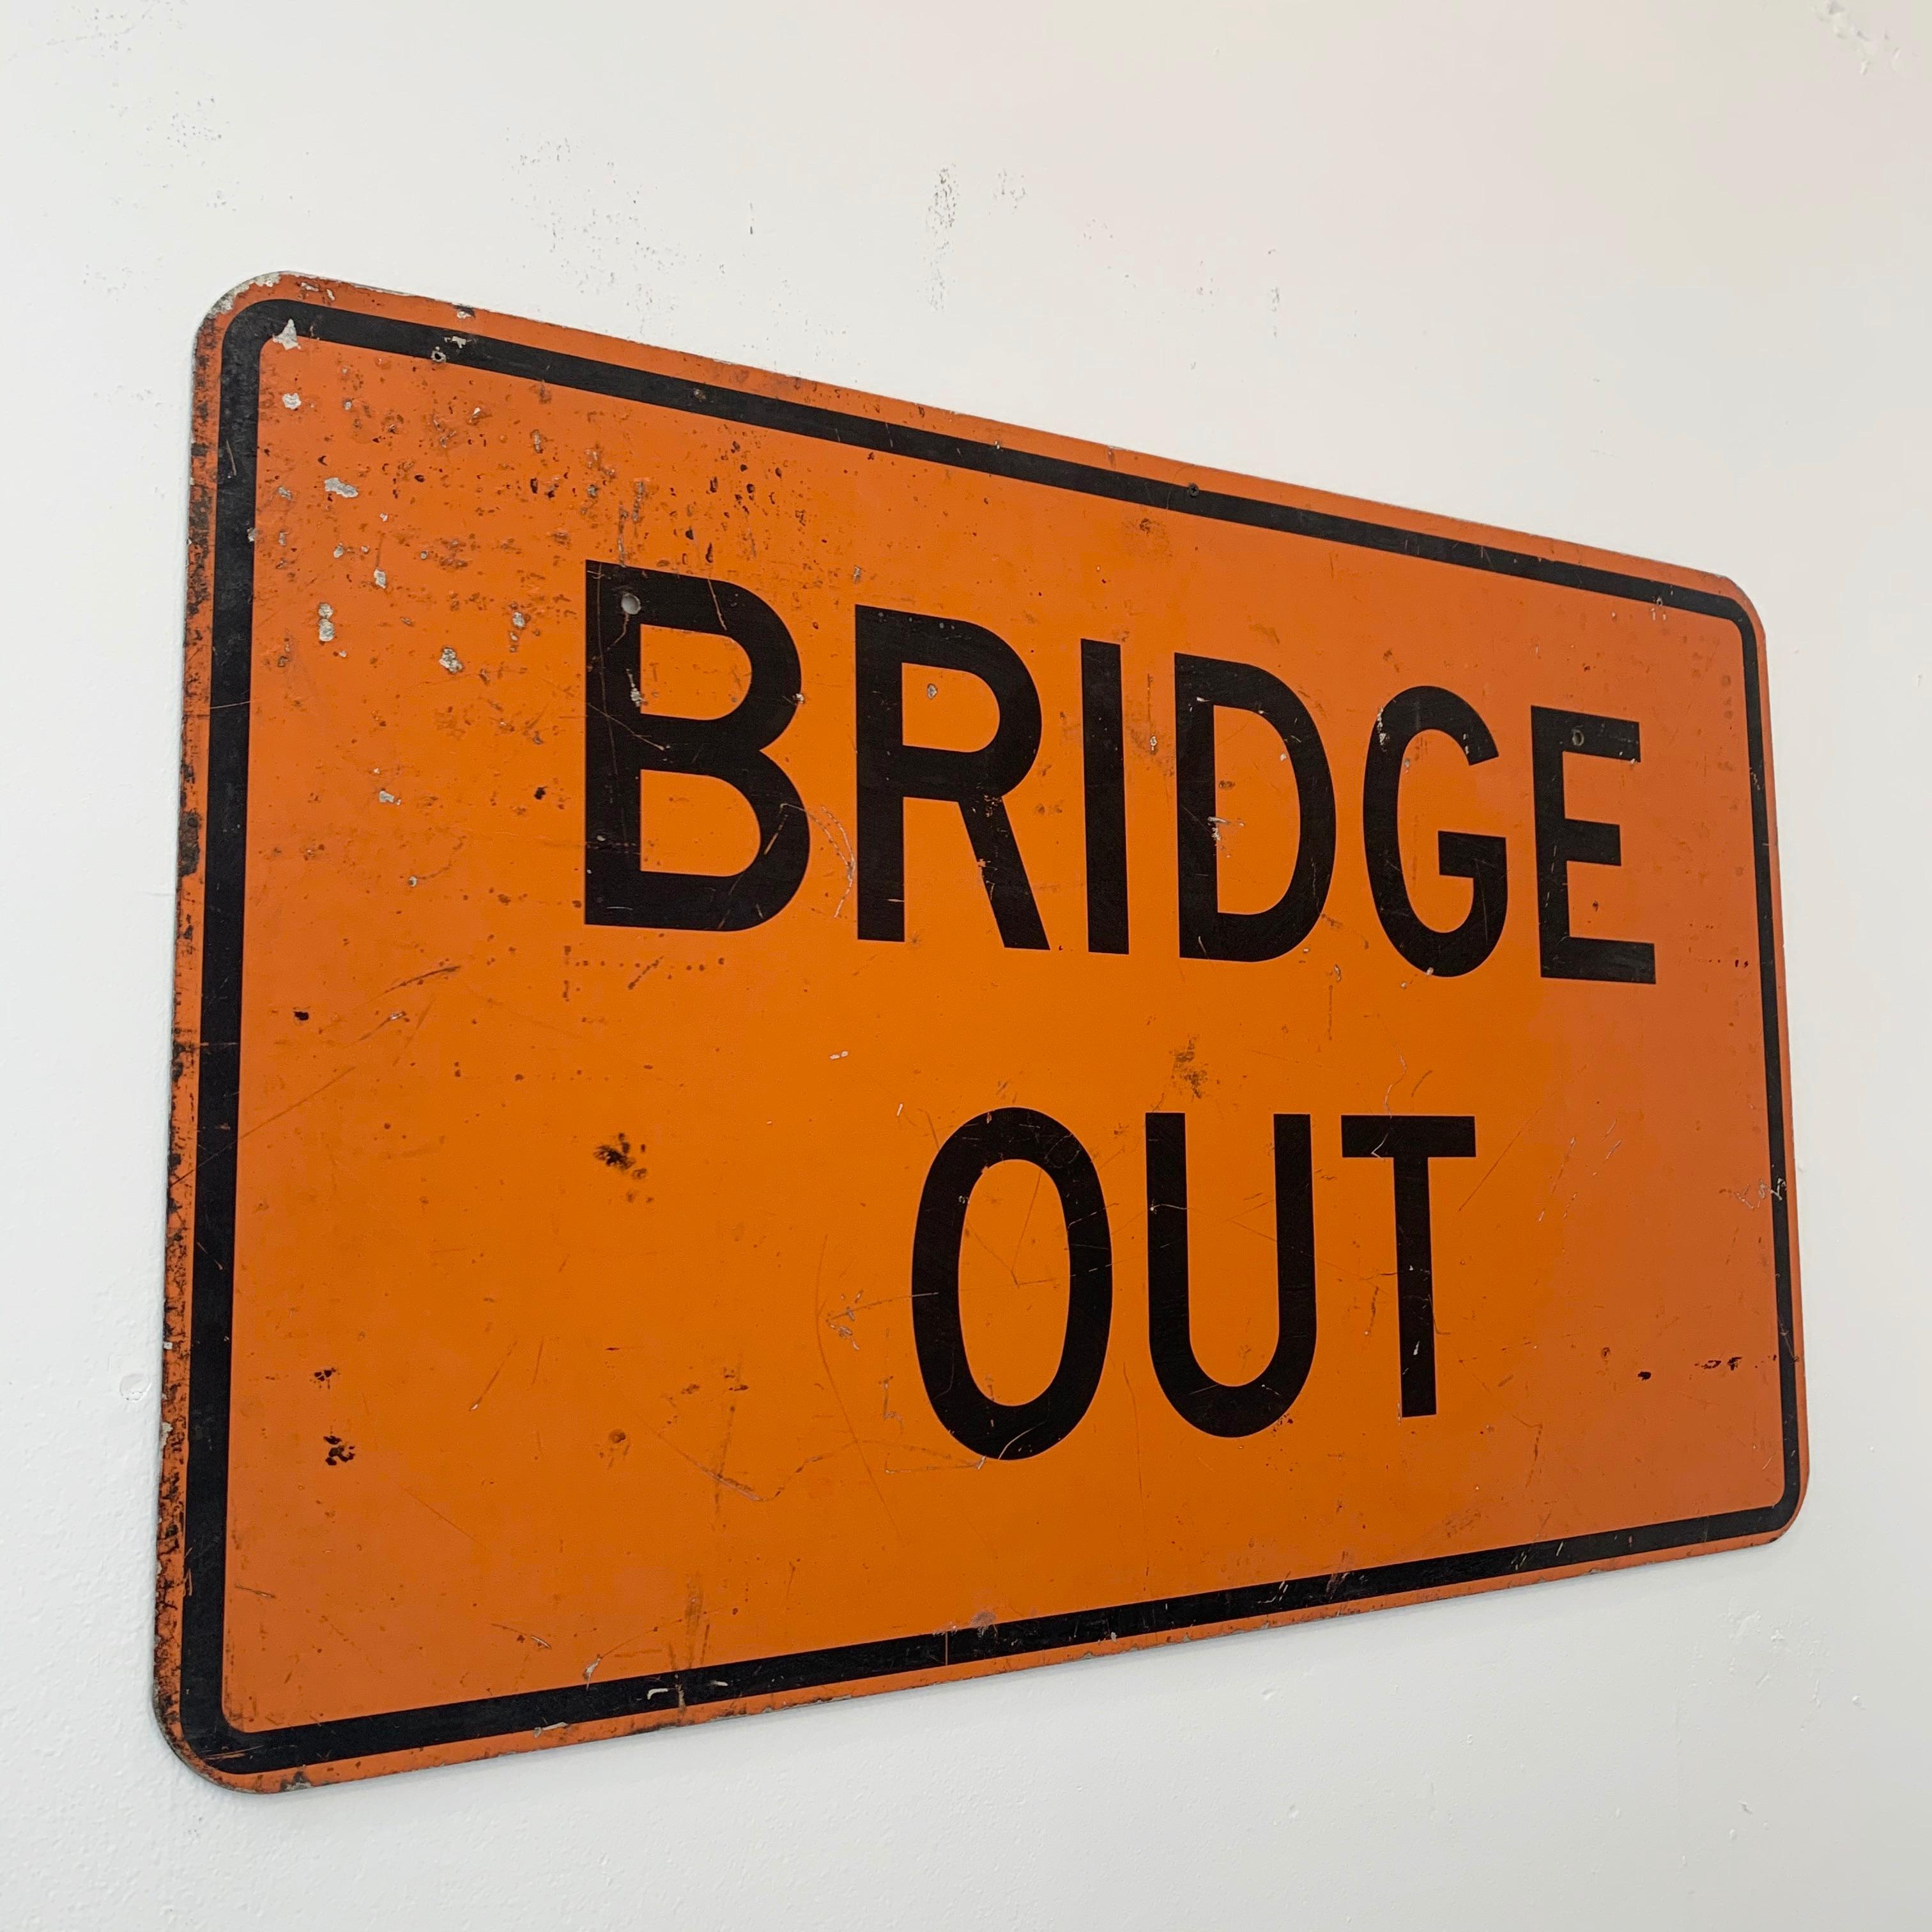 Super cool vintage metal 'BRIDGE OUT' sign from the East Coast. Measures: 4 feet wide. Orange sign with black lettering. Bullet holes and road rash to sign.